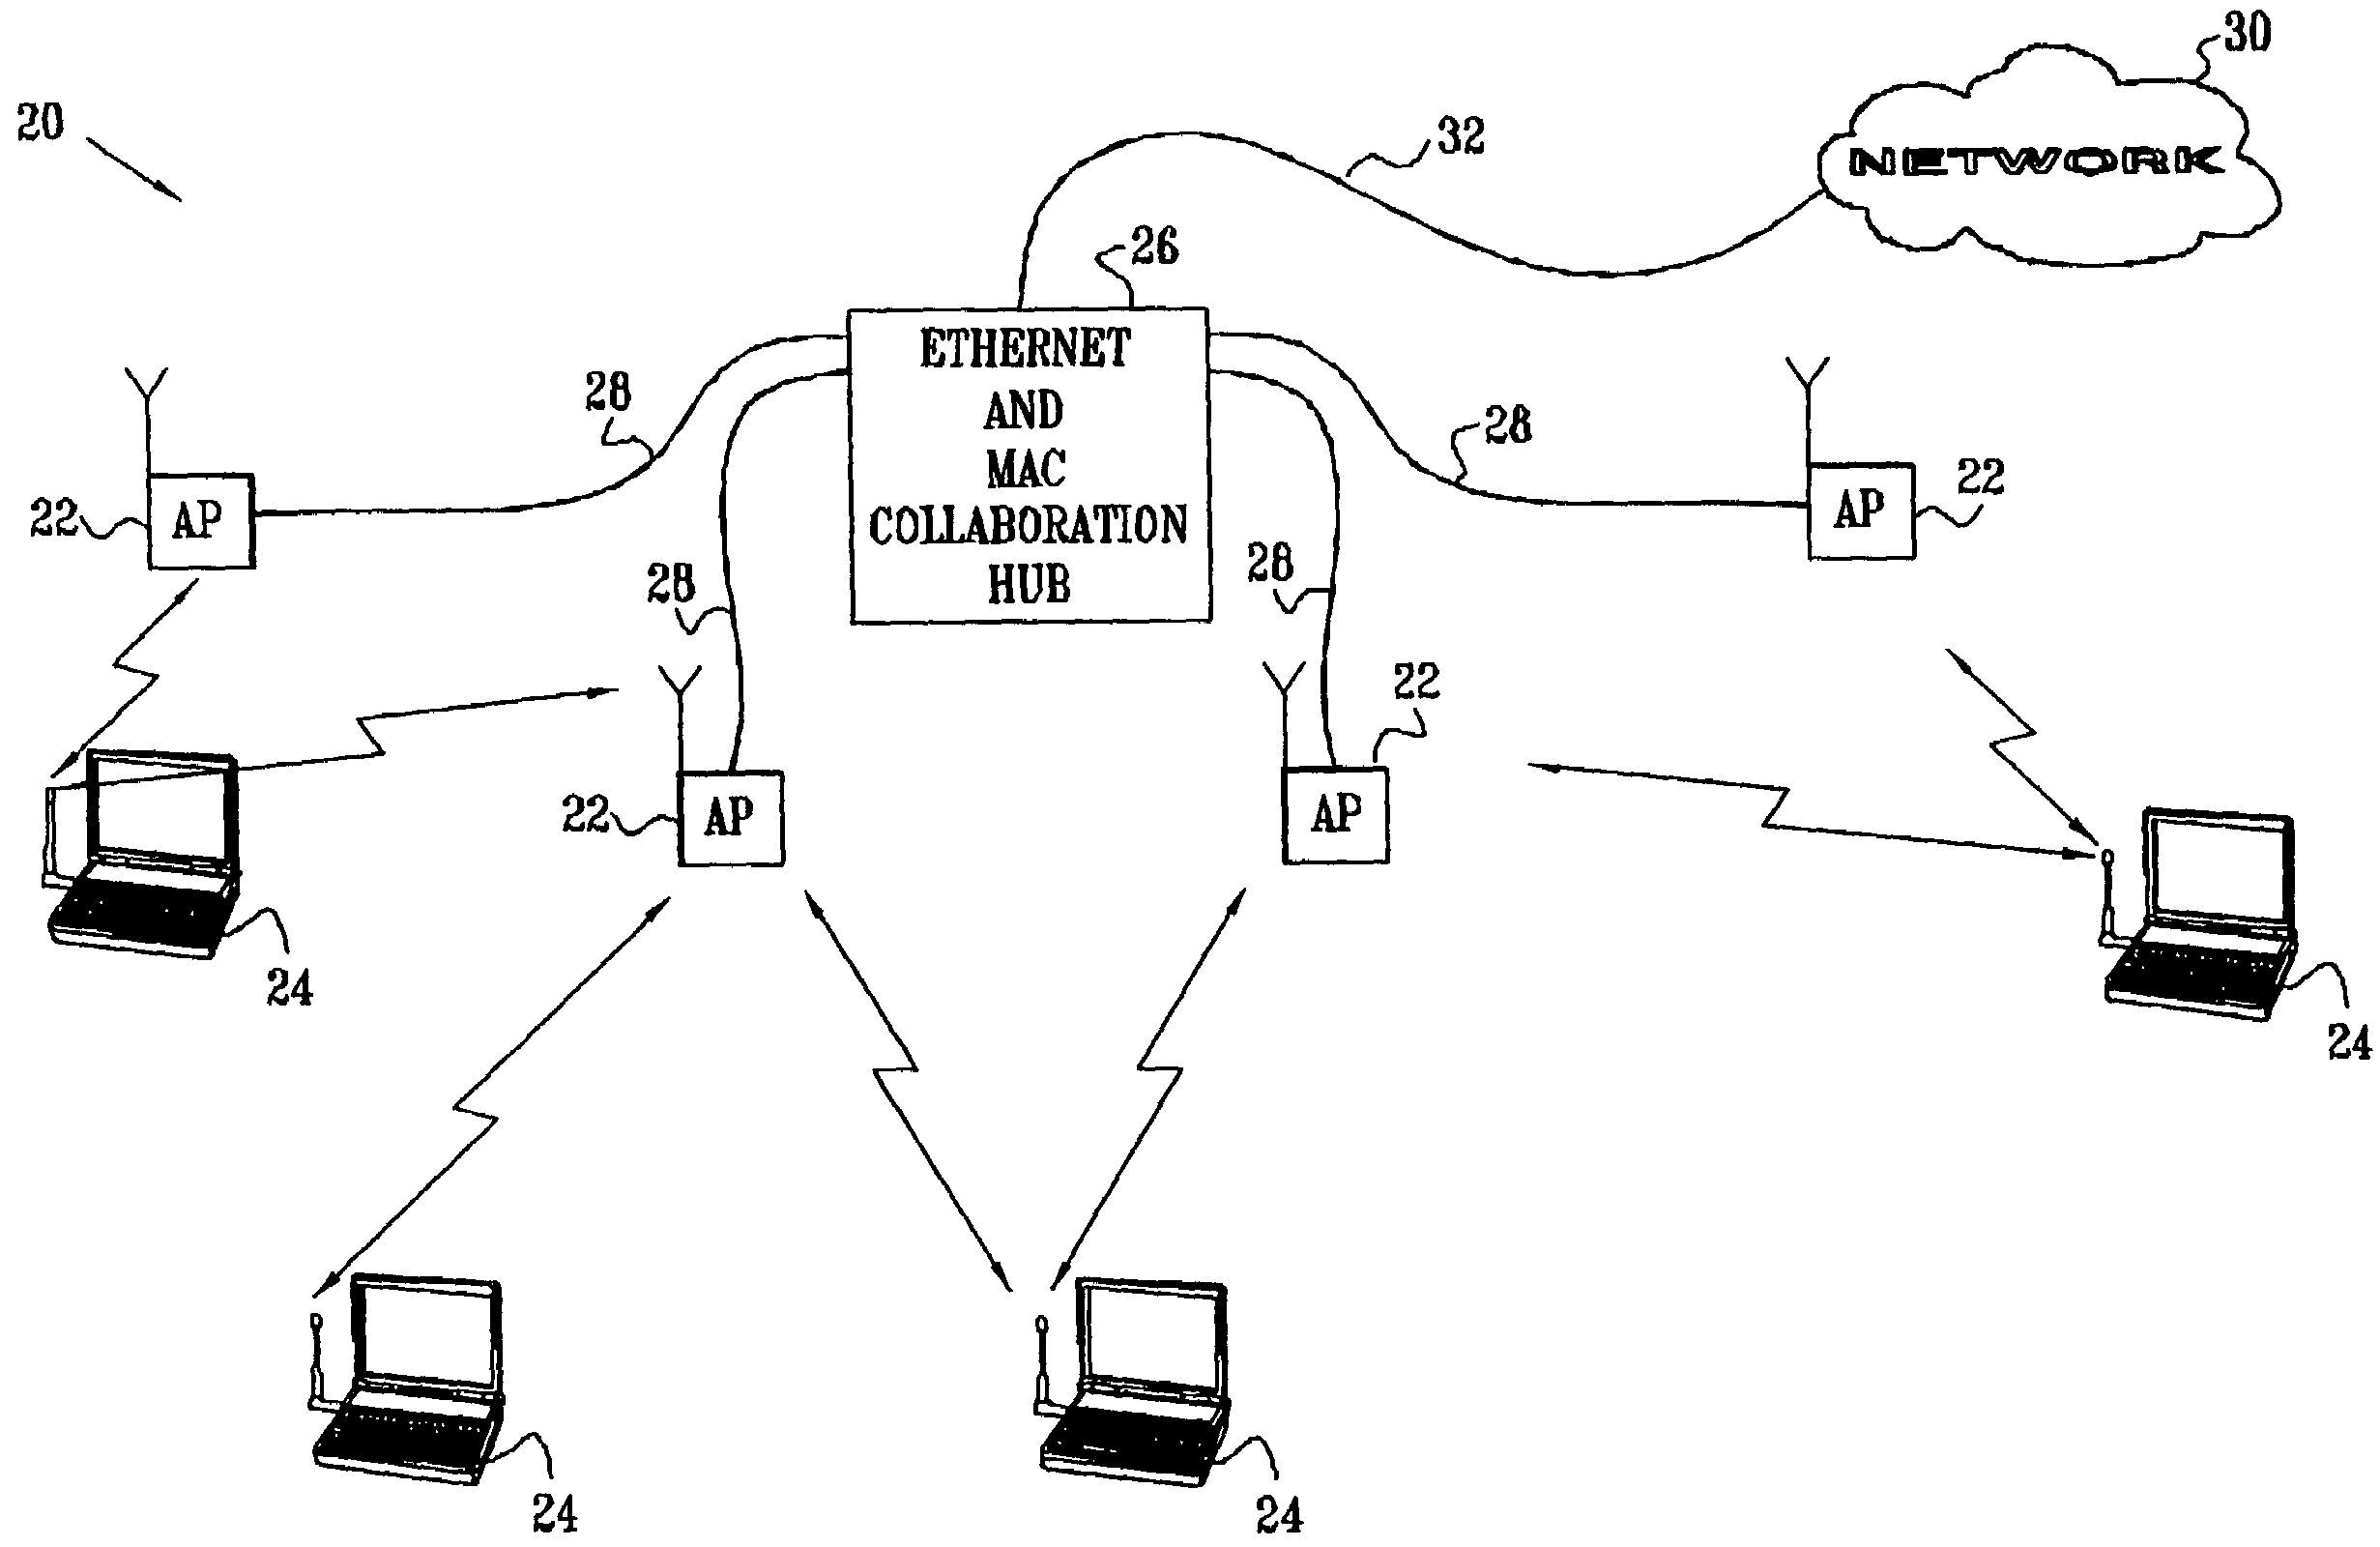 Collaboration between wireless LAN access points using wired LAN infrastructure